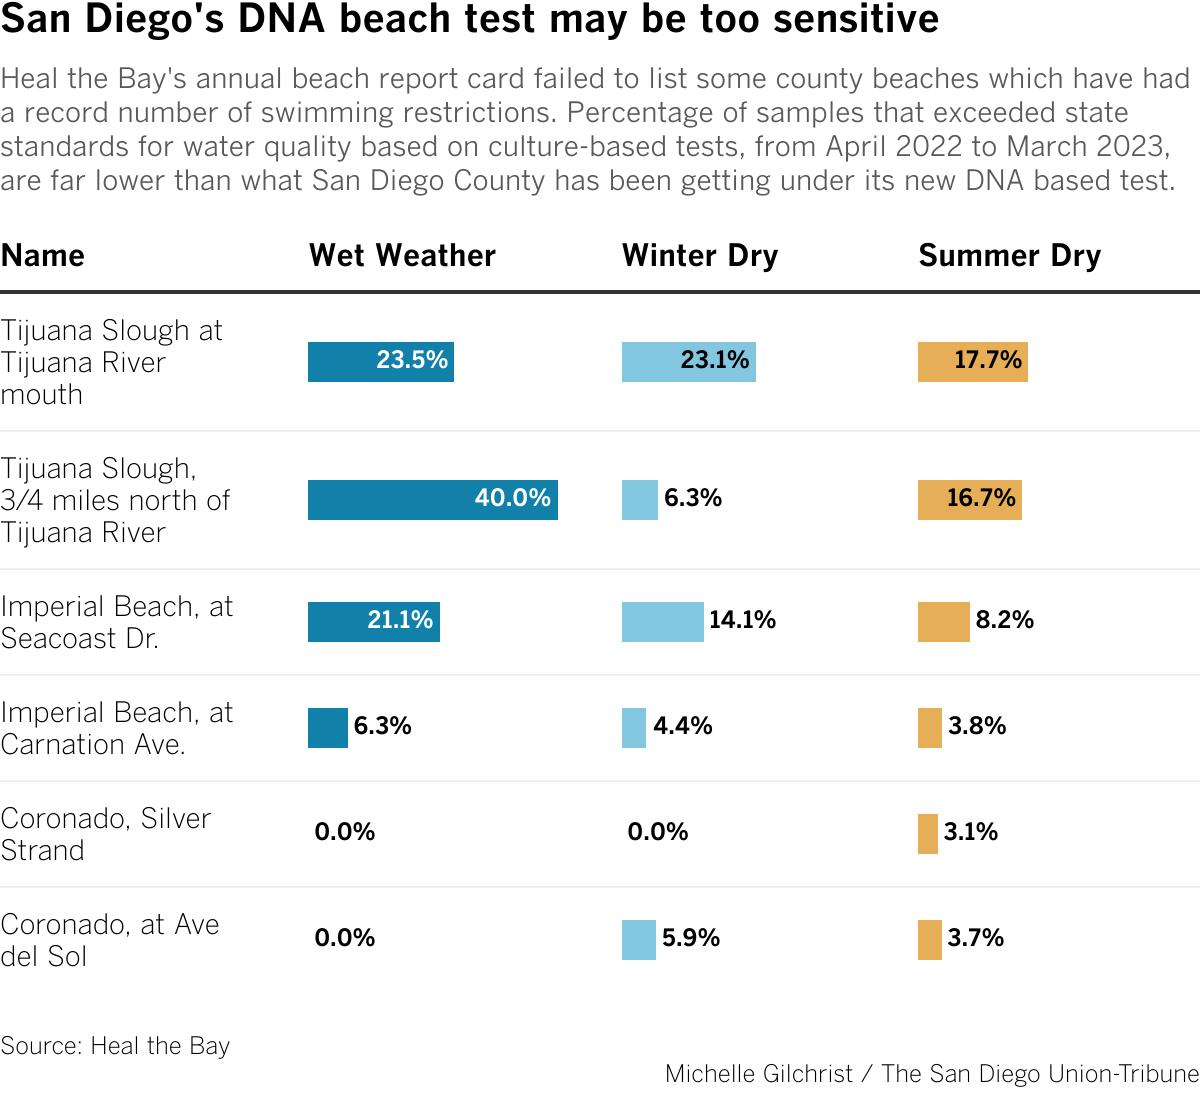 Heal the Bay's annual beach report card failed to list some county beaches which have had a record number of swimming restrictions. Percentage of samples that exceeded state standards for water quality based on culture-based tests, from April 2022 to March 2023, are far lower than what San Diego County has been getting under its new DNA based test.